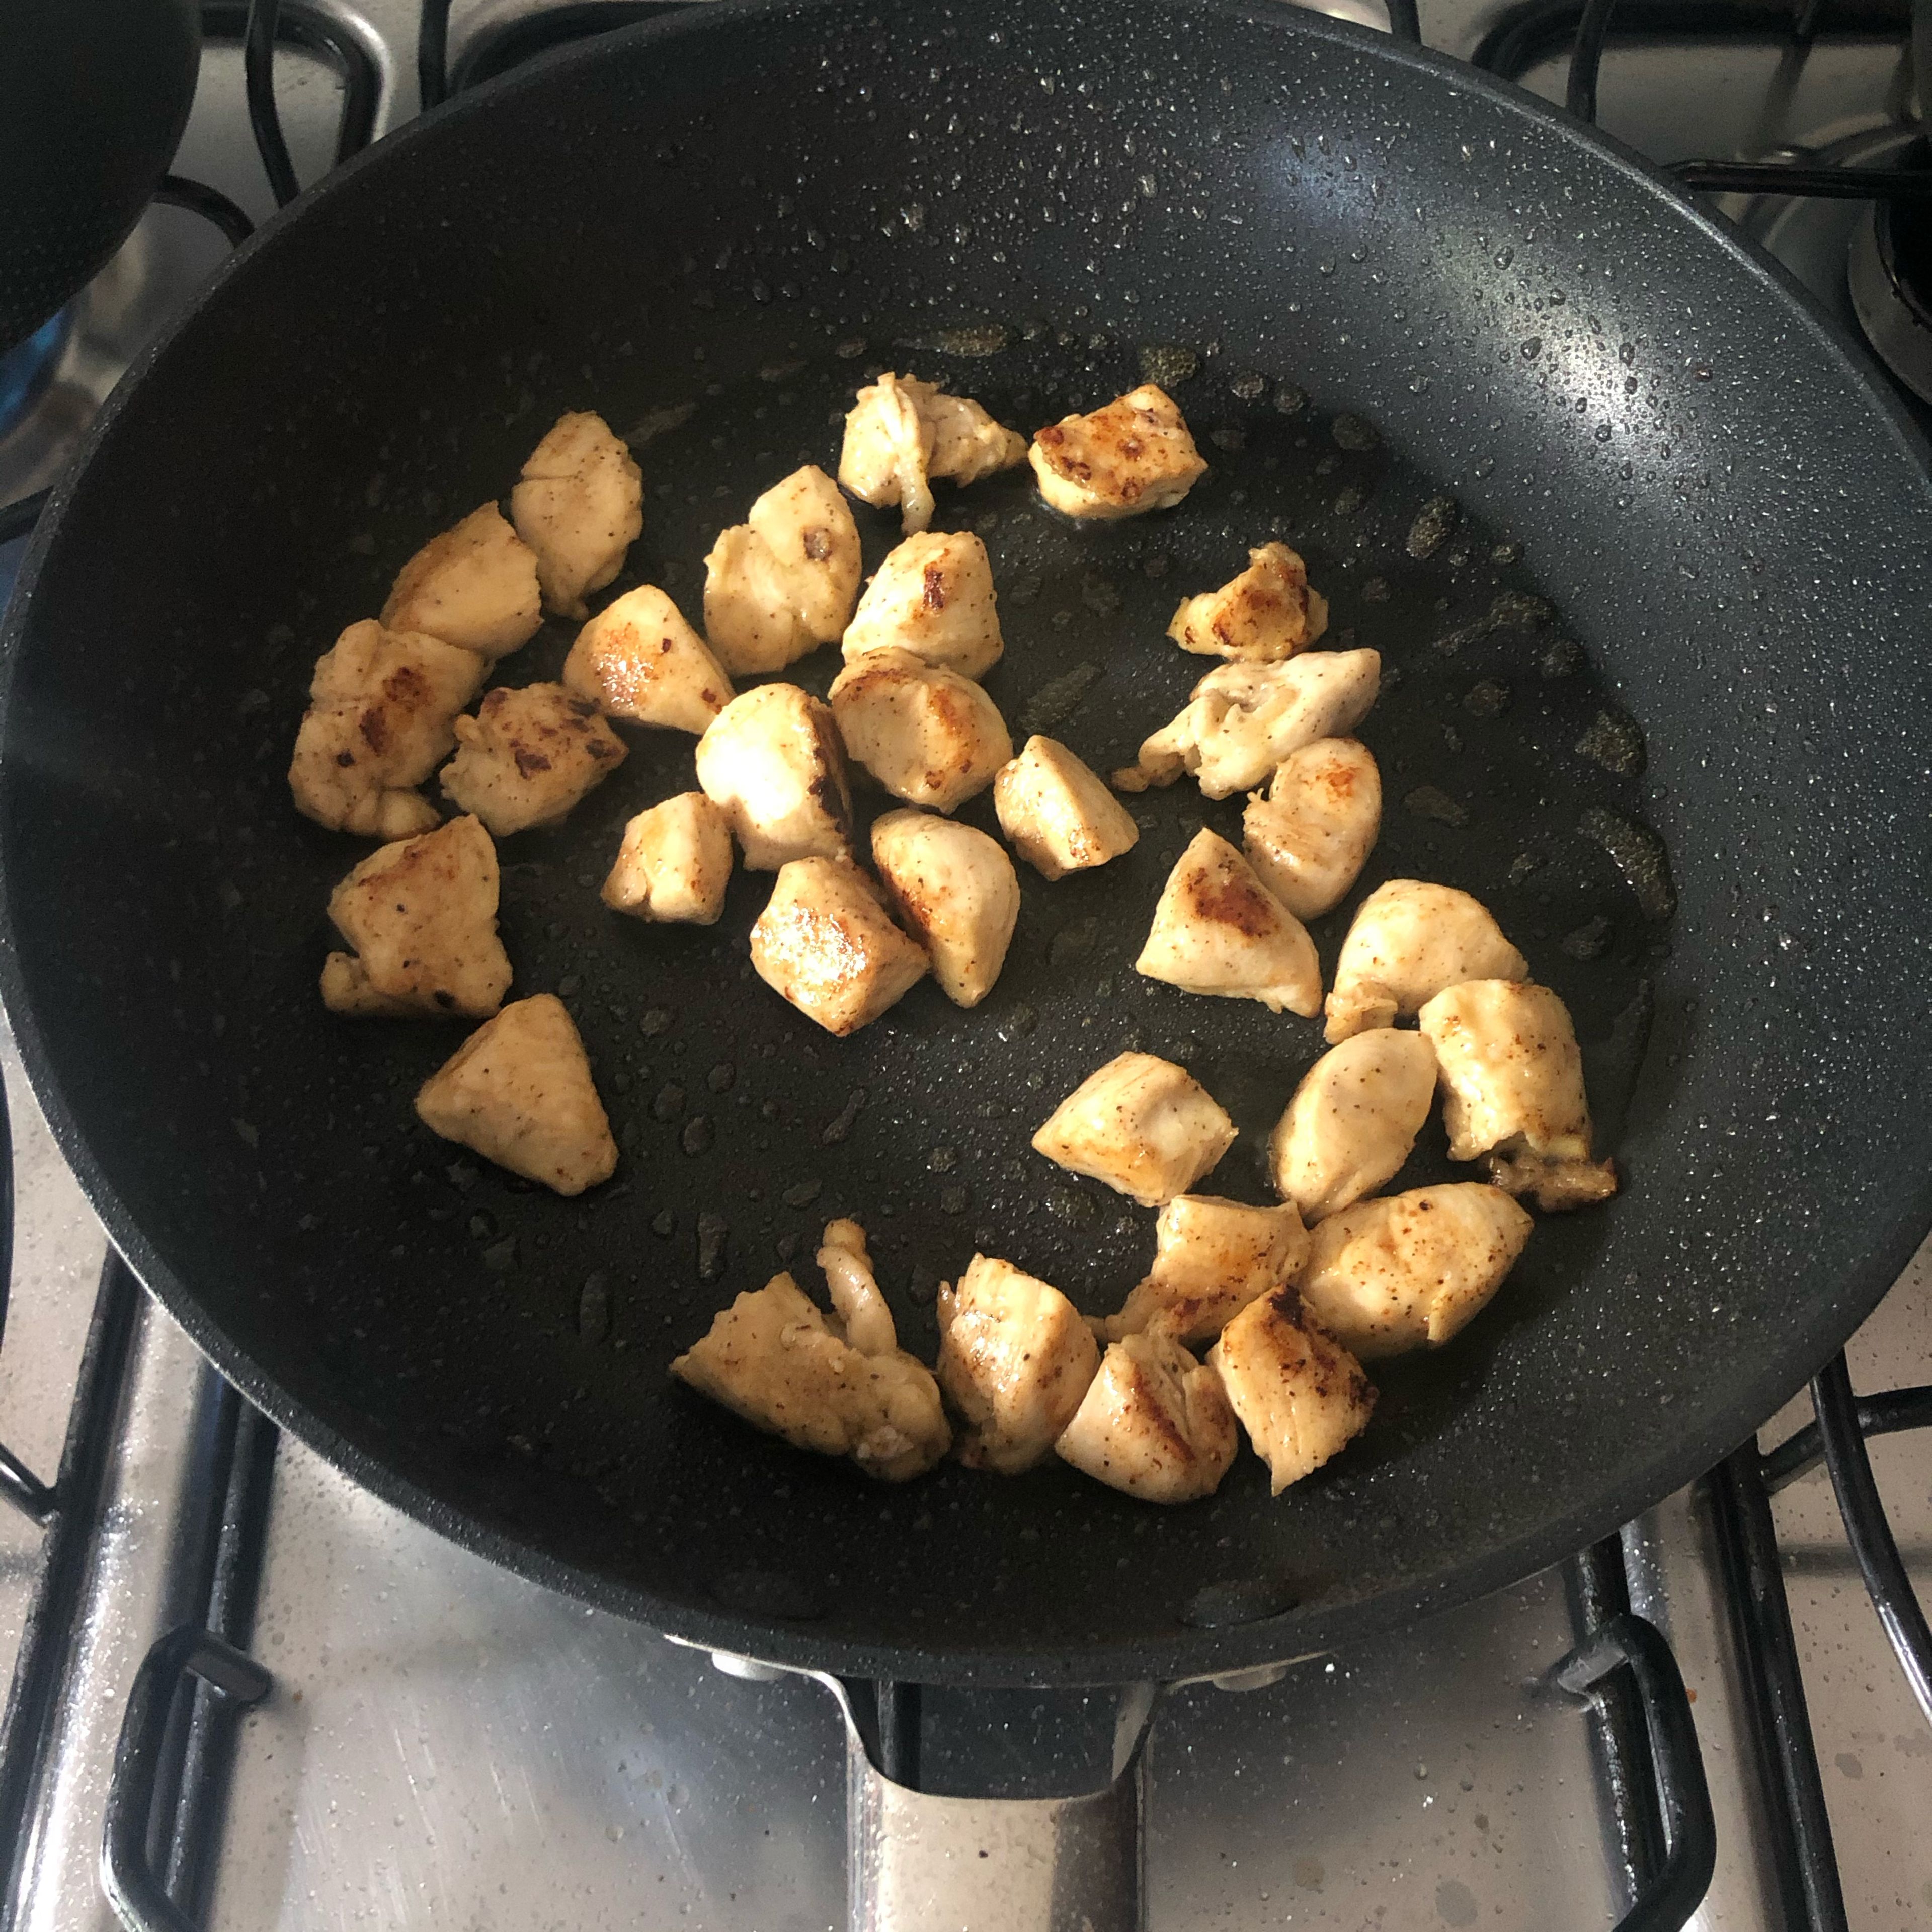 With a hot pan take the butter and melt it. When it’s melted, take the marinating chicken and put it to fry. It is better when crispy, so fry it as hot as you can. Shake it constantly!